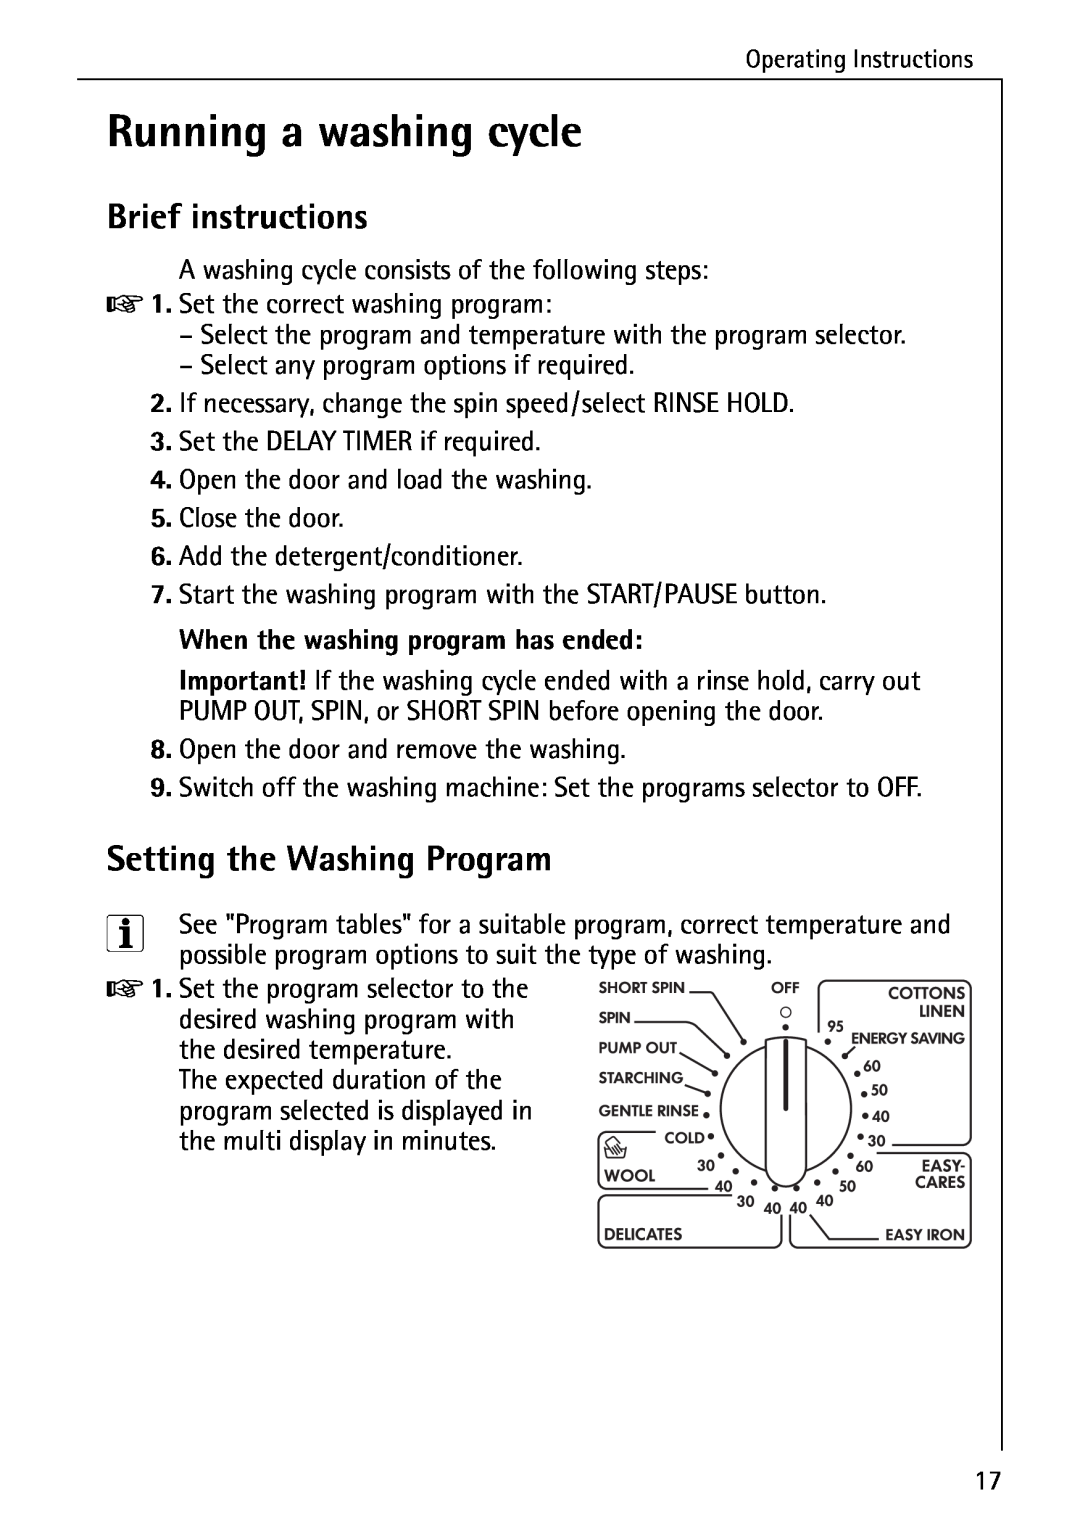 Electrolux 76639 manual Running a washing cycle, Brief instructions, Setting the Washing Program 